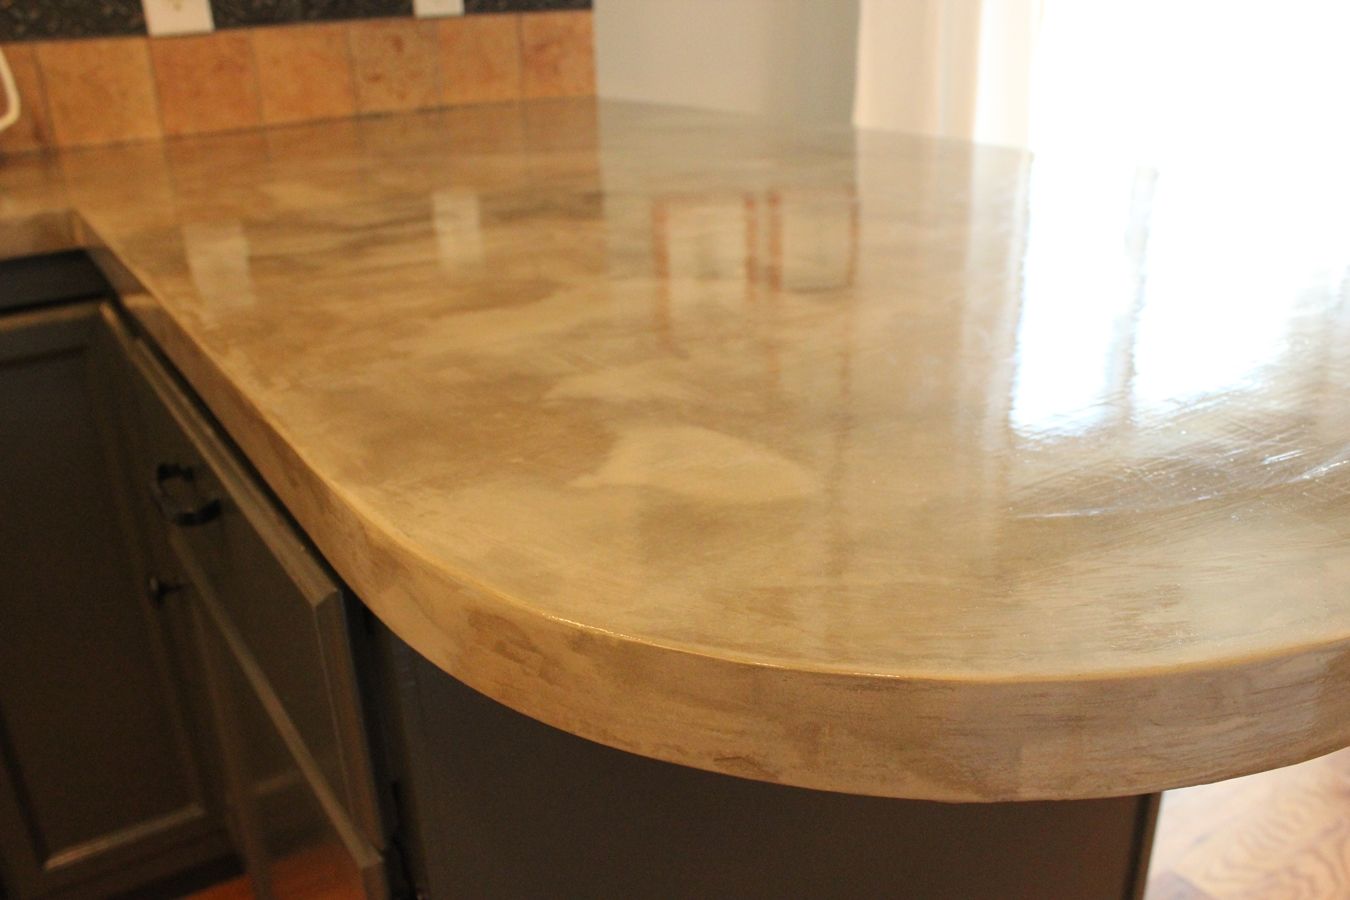 DIY Concrete Kitchen Countertops Finished Smooth